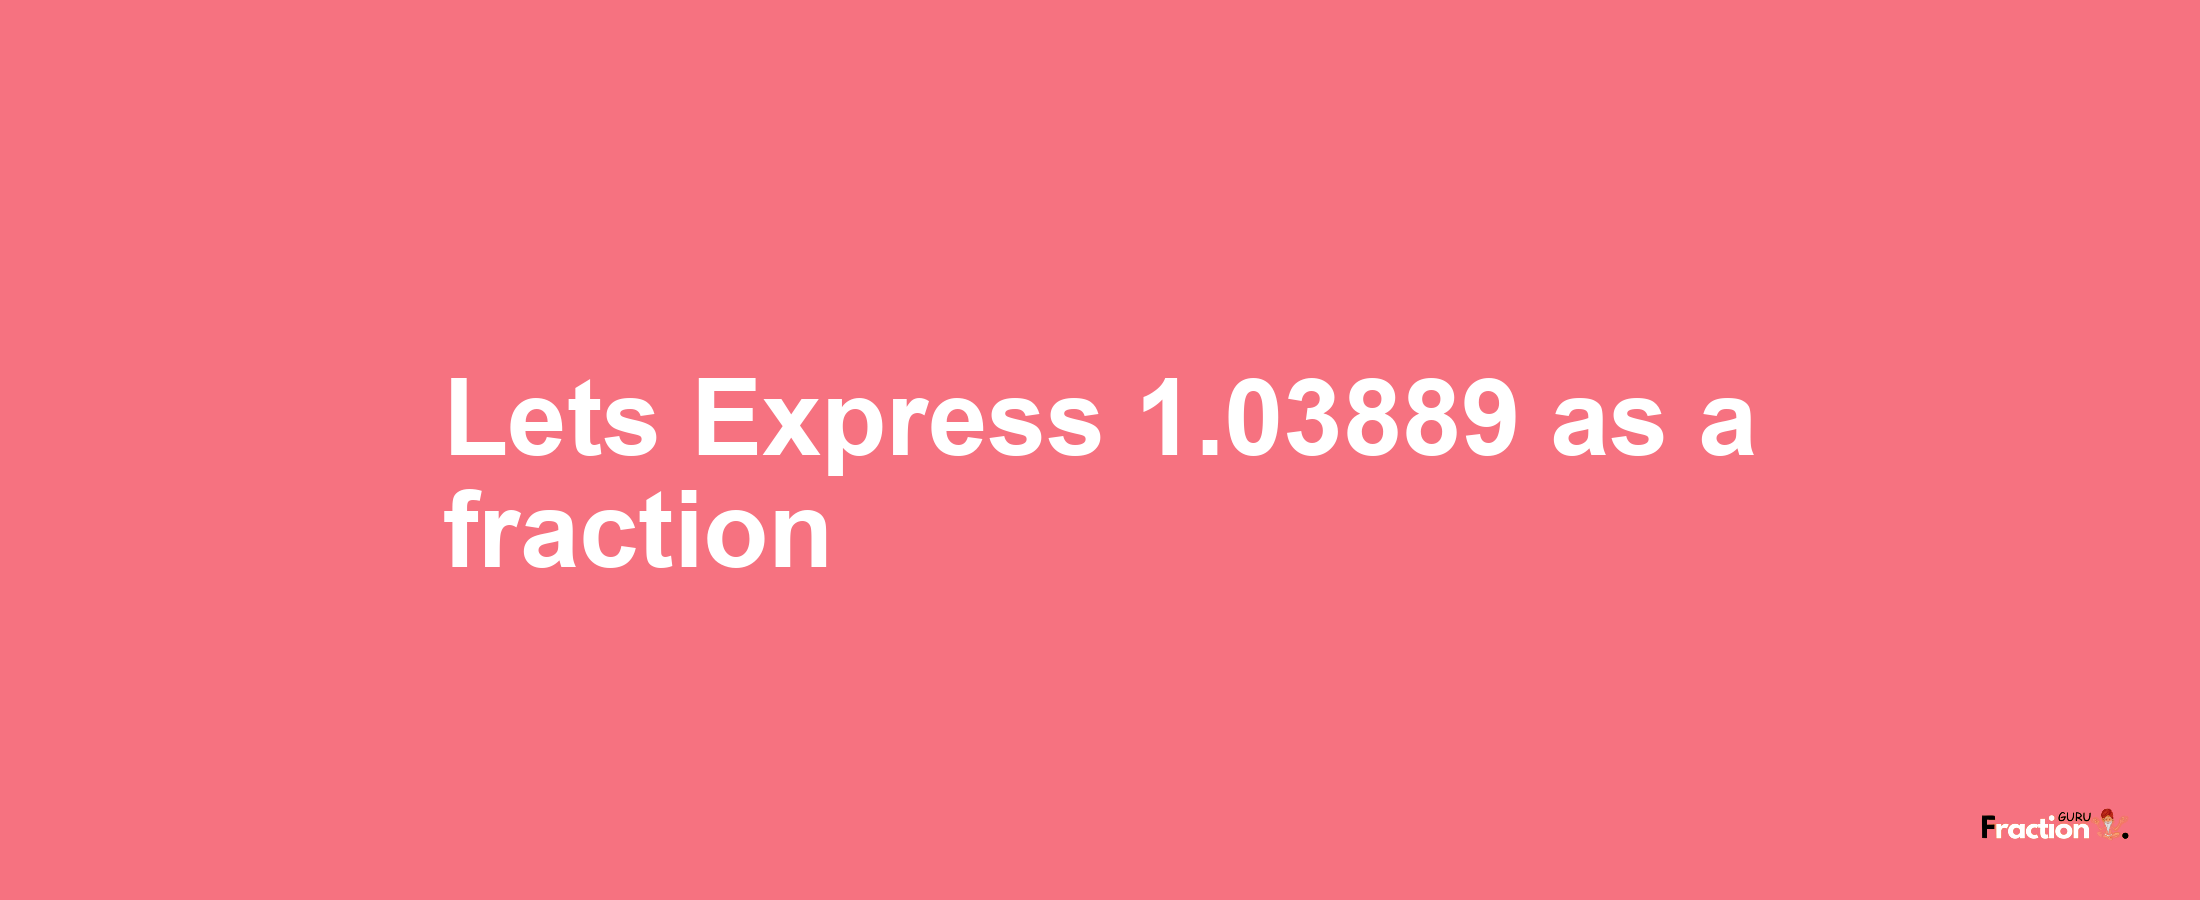 Lets Express 1.03889 as afraction